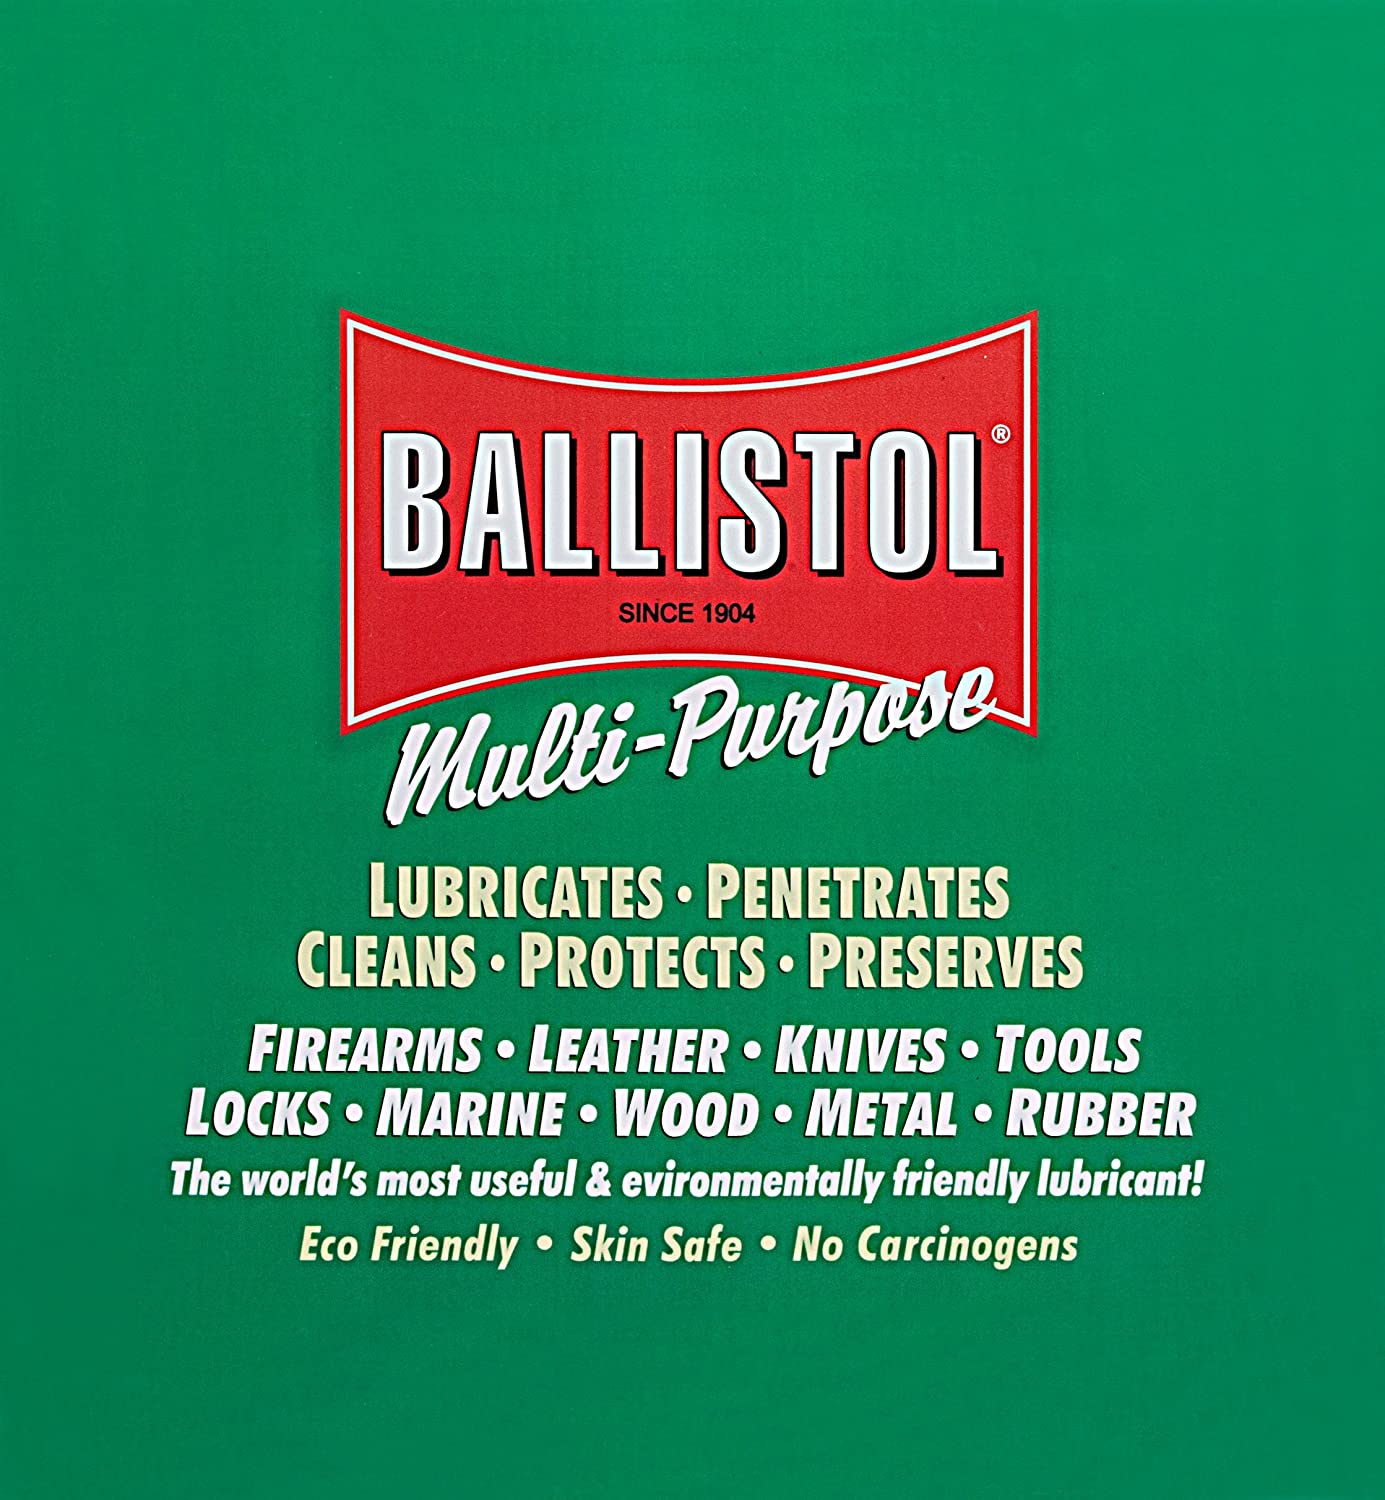 Ballistol Multi-Purpose Can Lubricant Cleaner Protectant 6 oz Bundle with 10-Pack Multi-Purpose Wipes Pack - Pro-Distributing